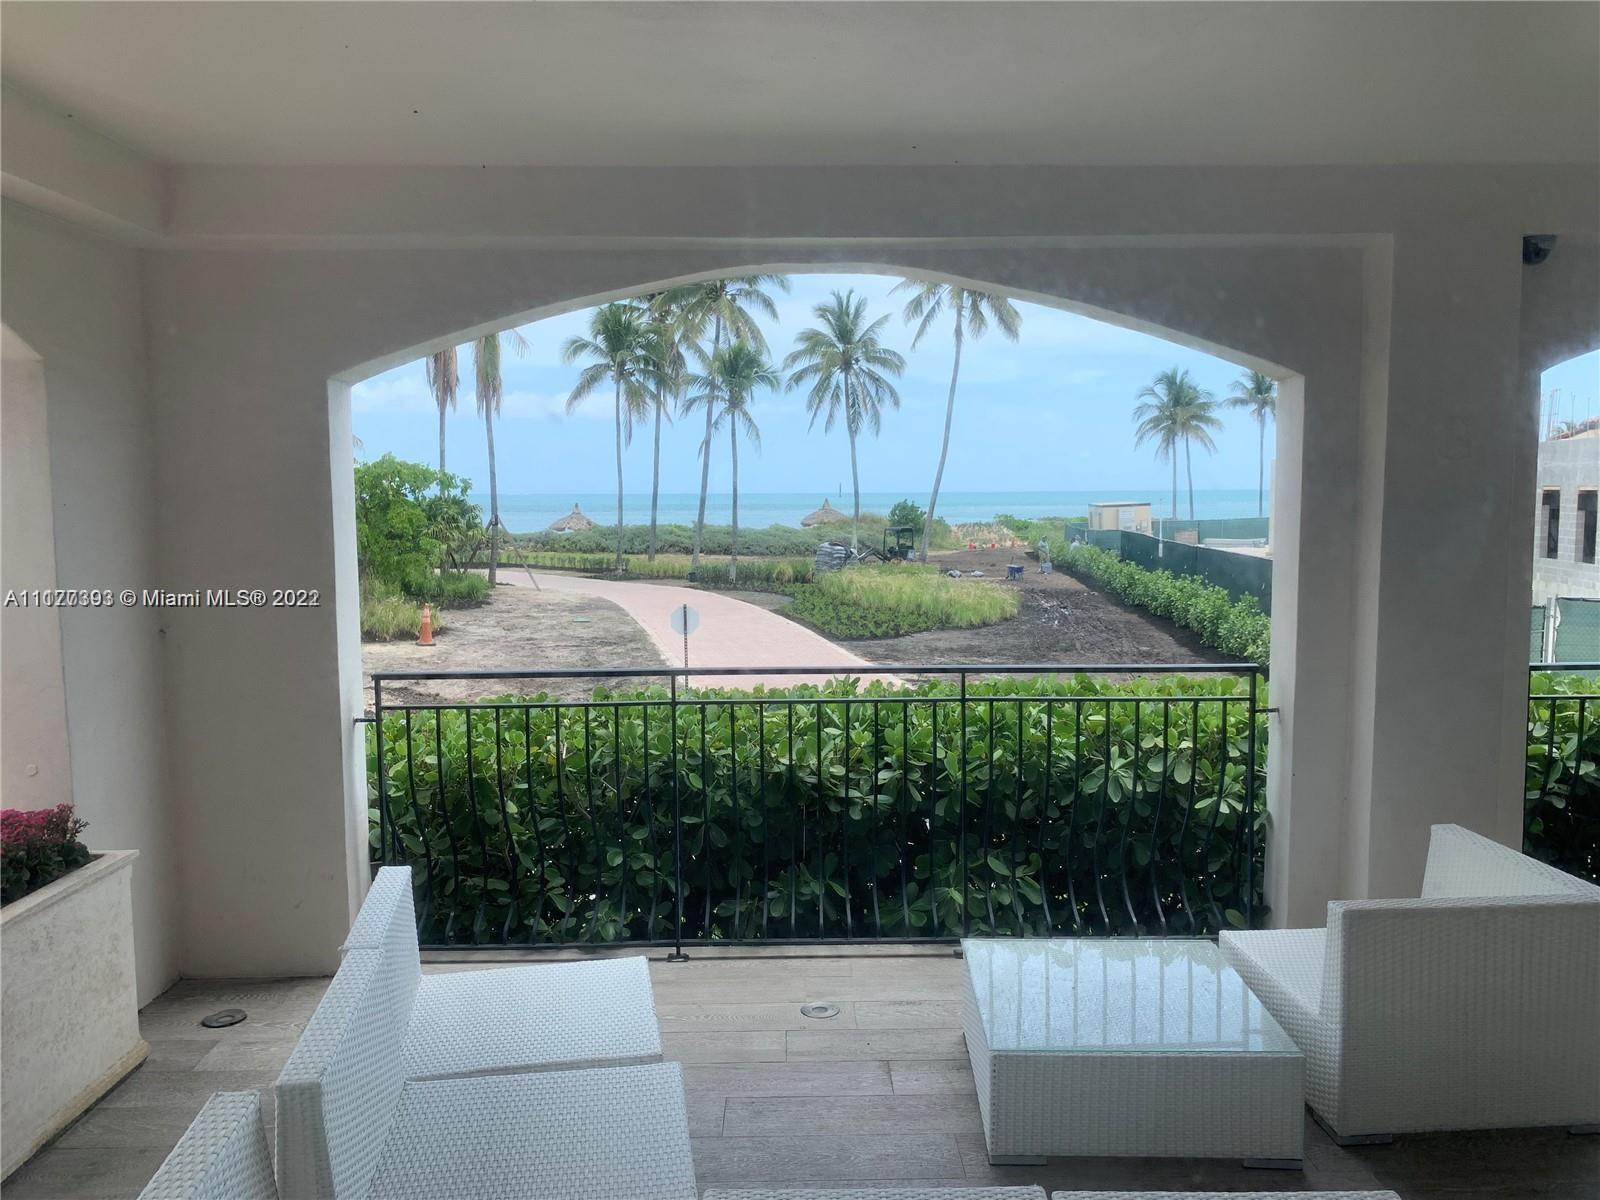 Ground floor unit with direct access to beach from terrace. 3 bedrooms 3 baths, Completely Remodeled  "Subject to club facilities usage fee separate". Available Nov. 15 thru December 2nd at seasonal rate.